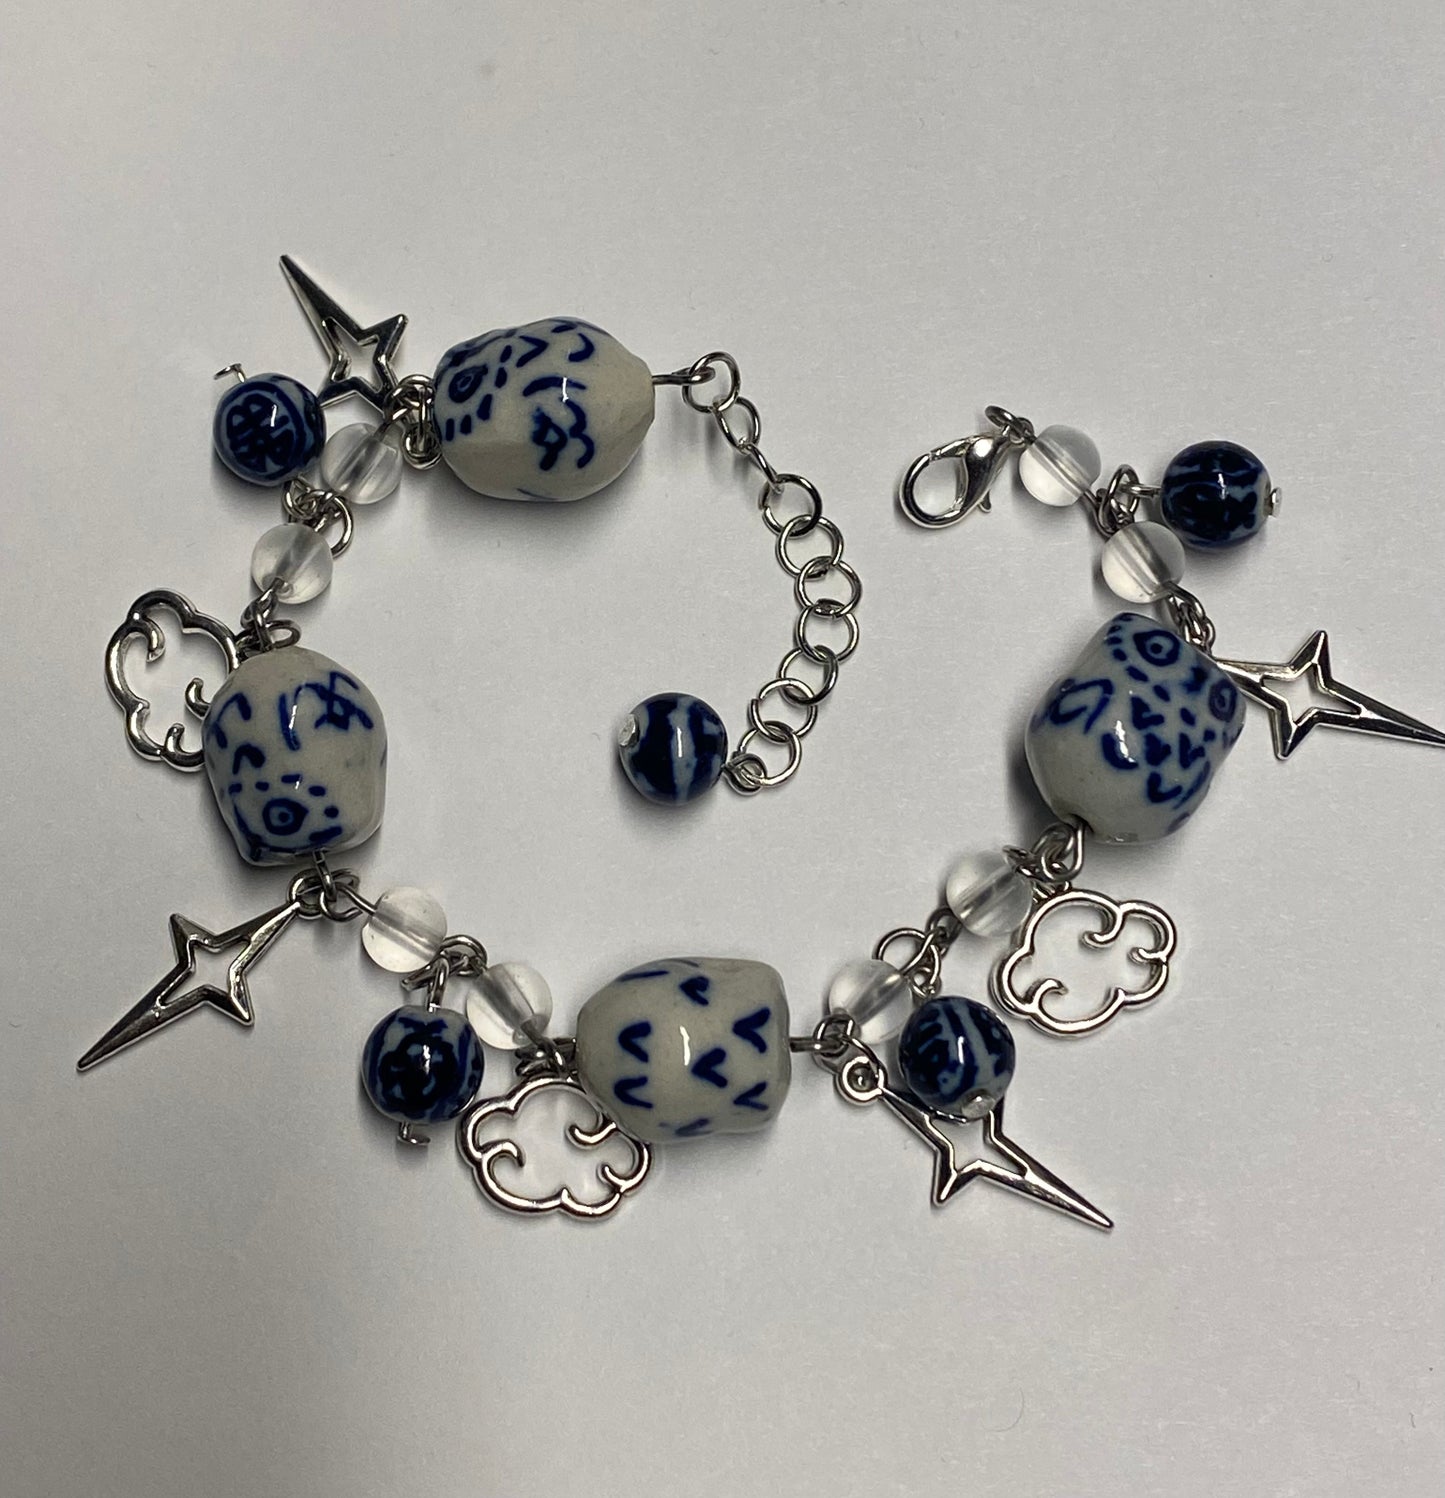 Owls in stars and clouds - bracelet